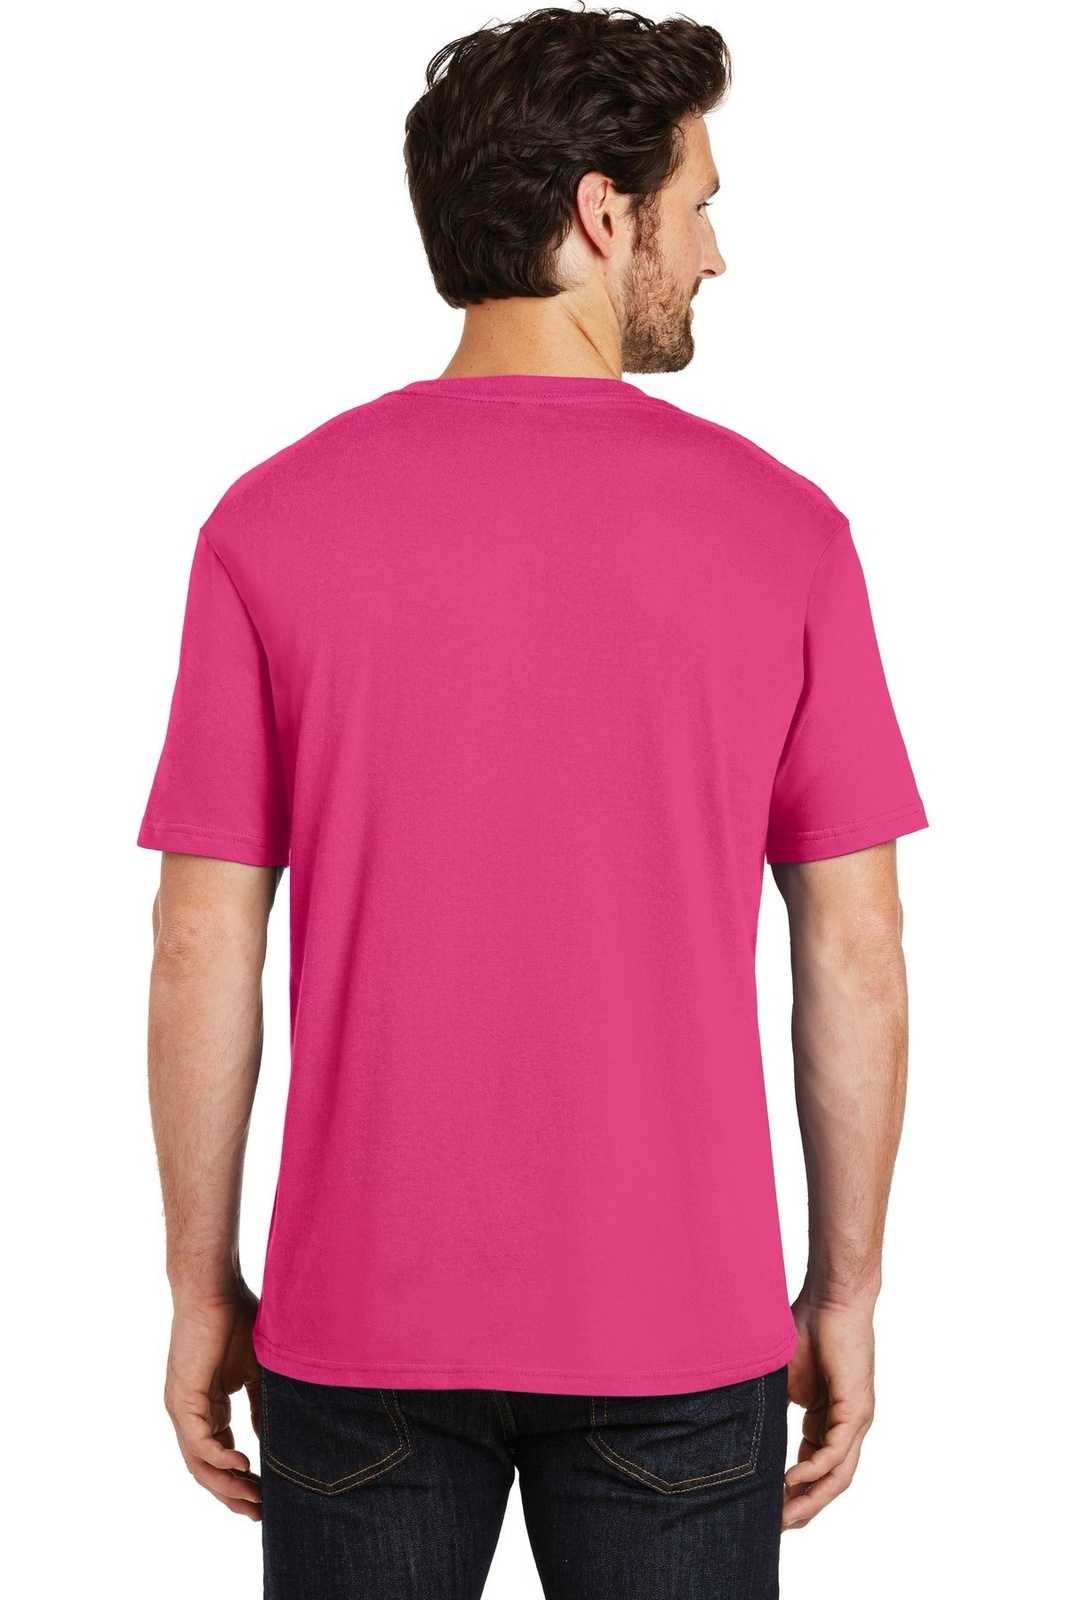 District DT104 Perfect Weight Tee - Dark Fuchsia - HIT a Double - 1